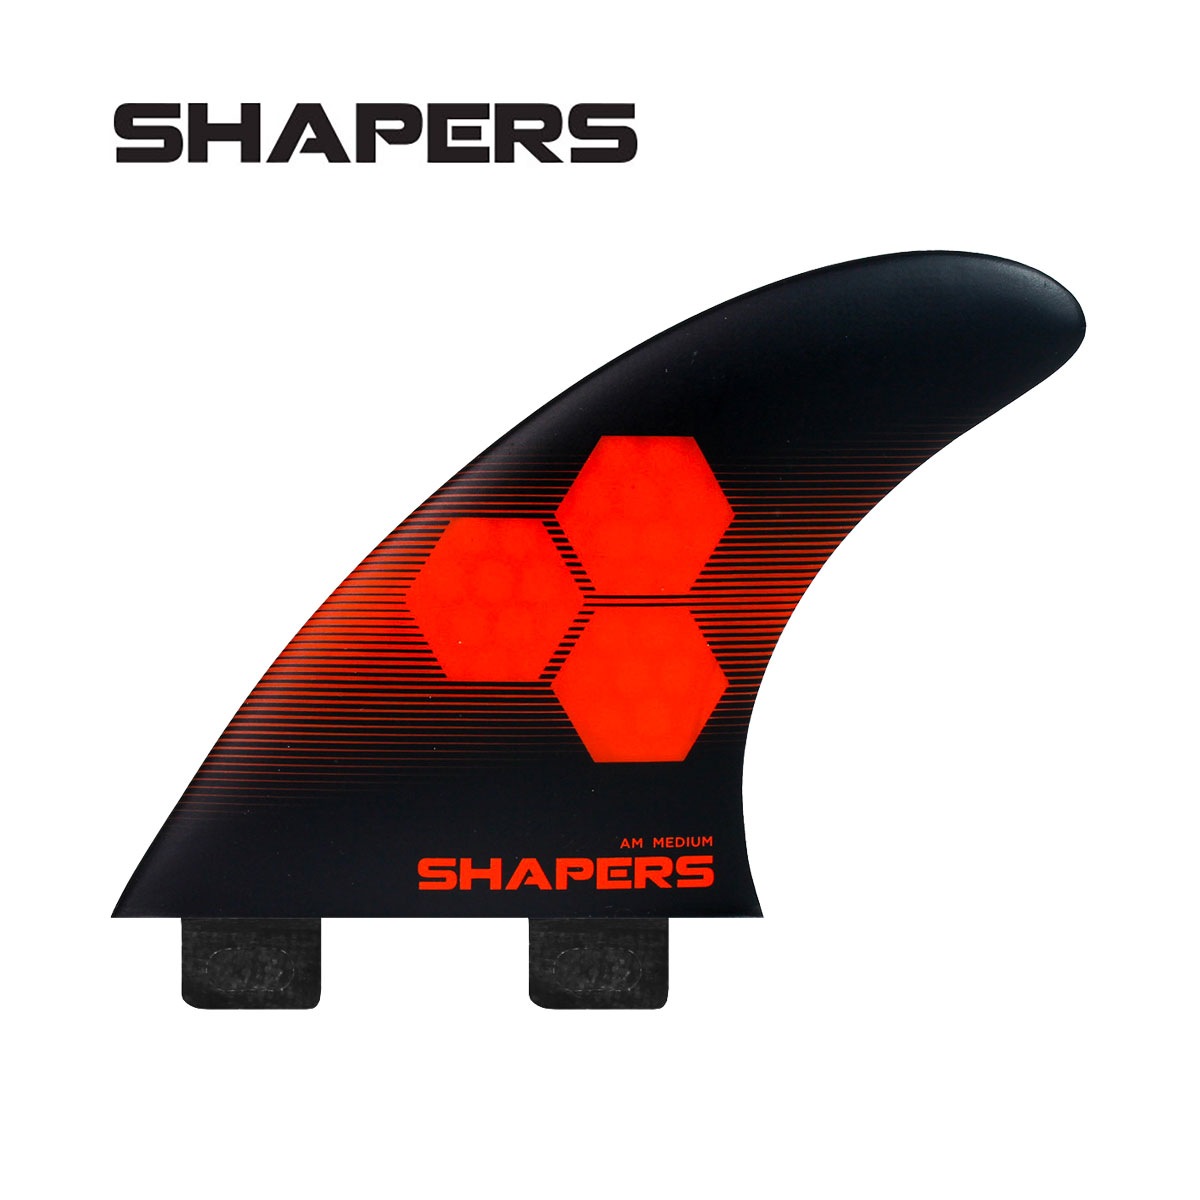 shapers AM